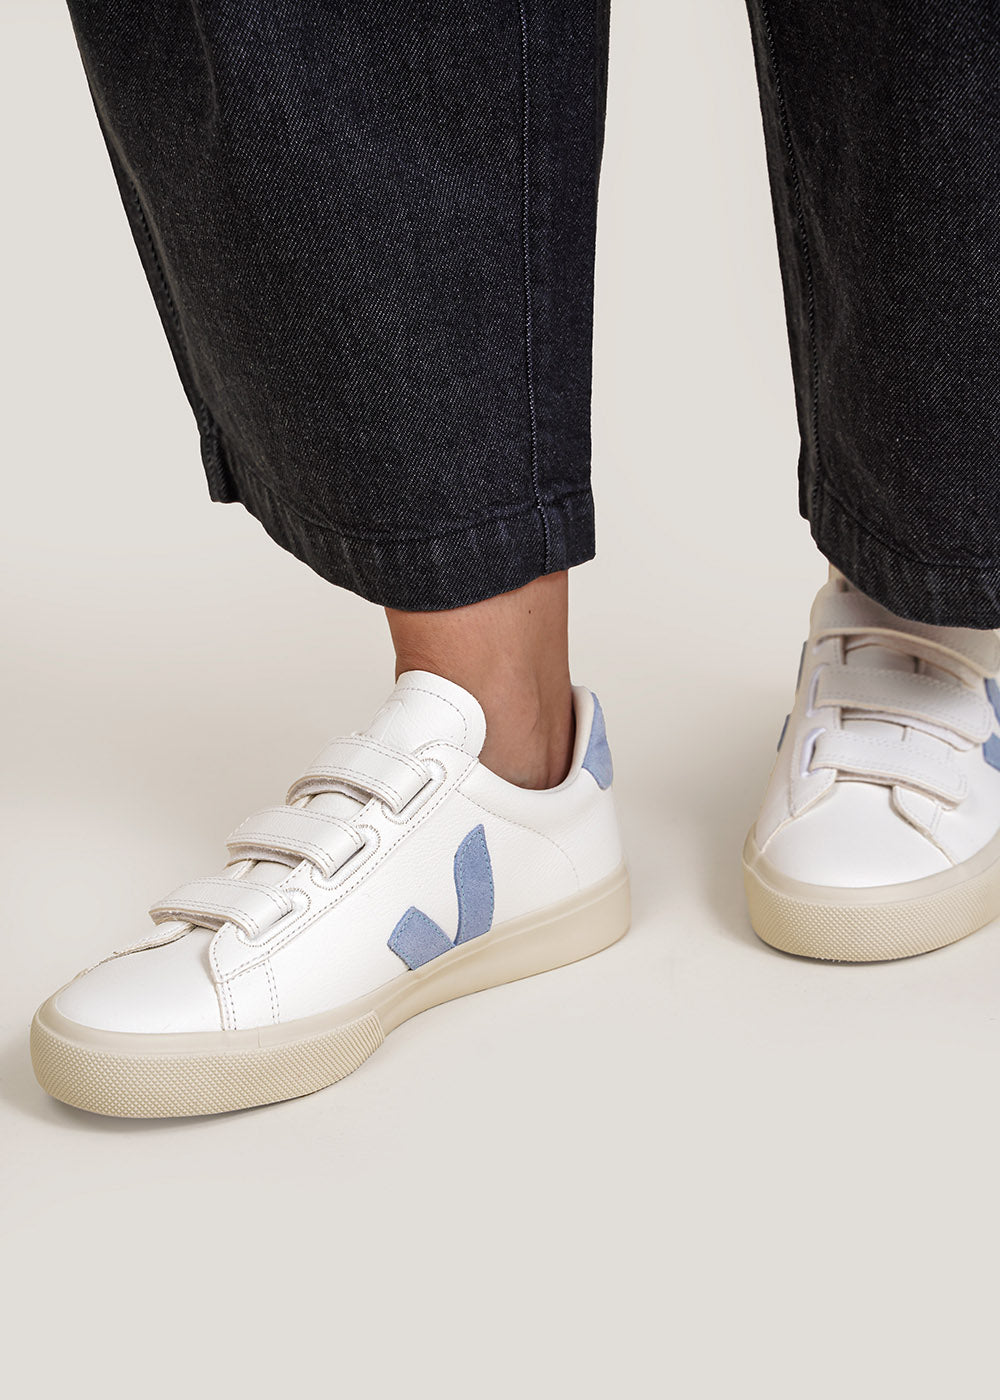 Recife Sneakers in White Steel by VEJA – New Classics Studios